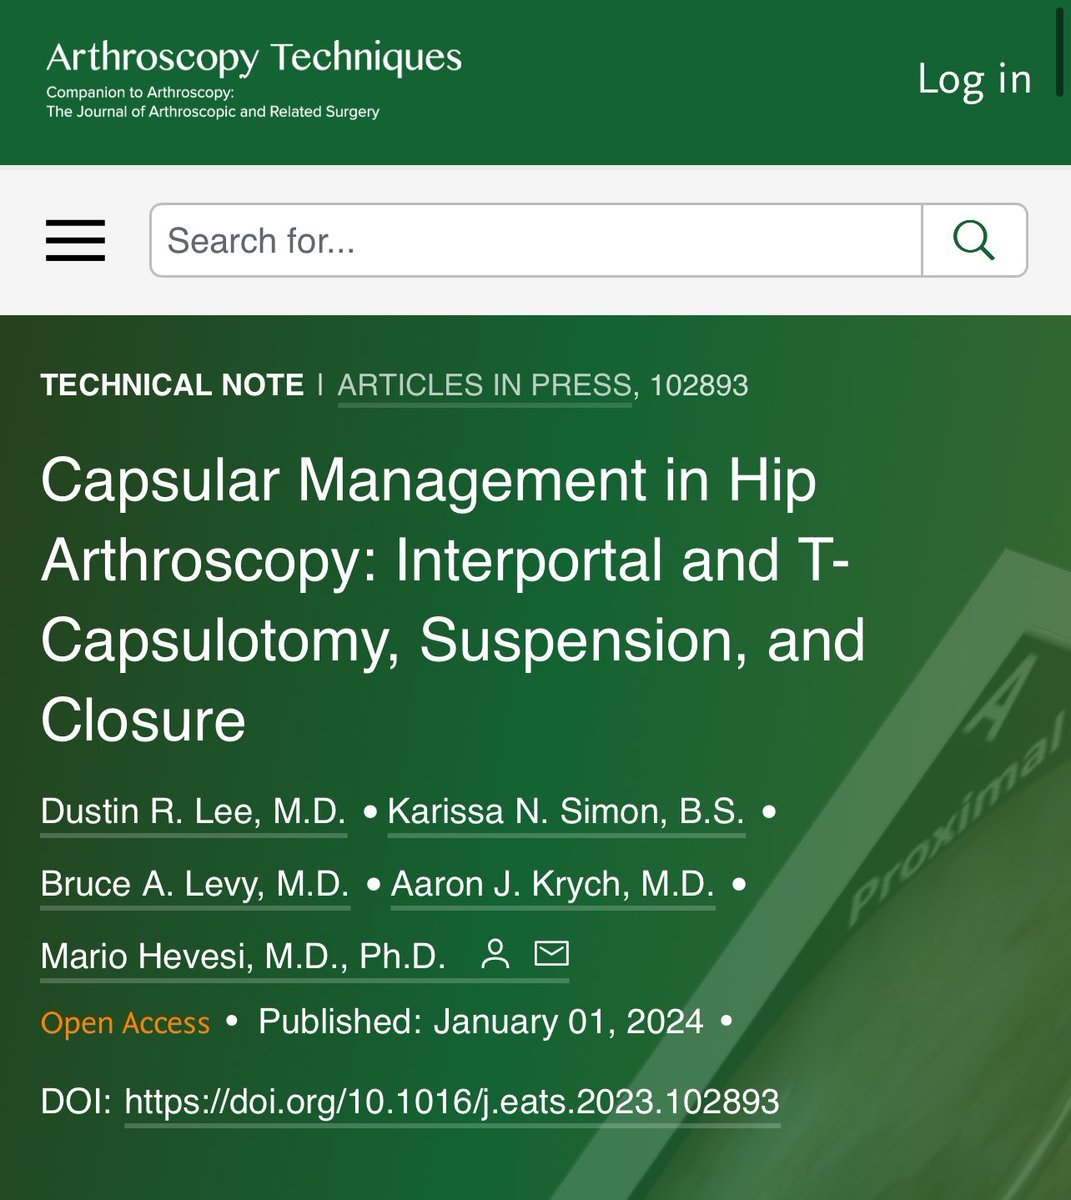 Check out our latest #TechniqueArticle on capsular management in hip arthroscopy - preserve and repair the capsule to restore joint function! arthroscopytechniques.org/article/S2212-… @MayoHipPres @MayoOrtho @mayoclinicsport